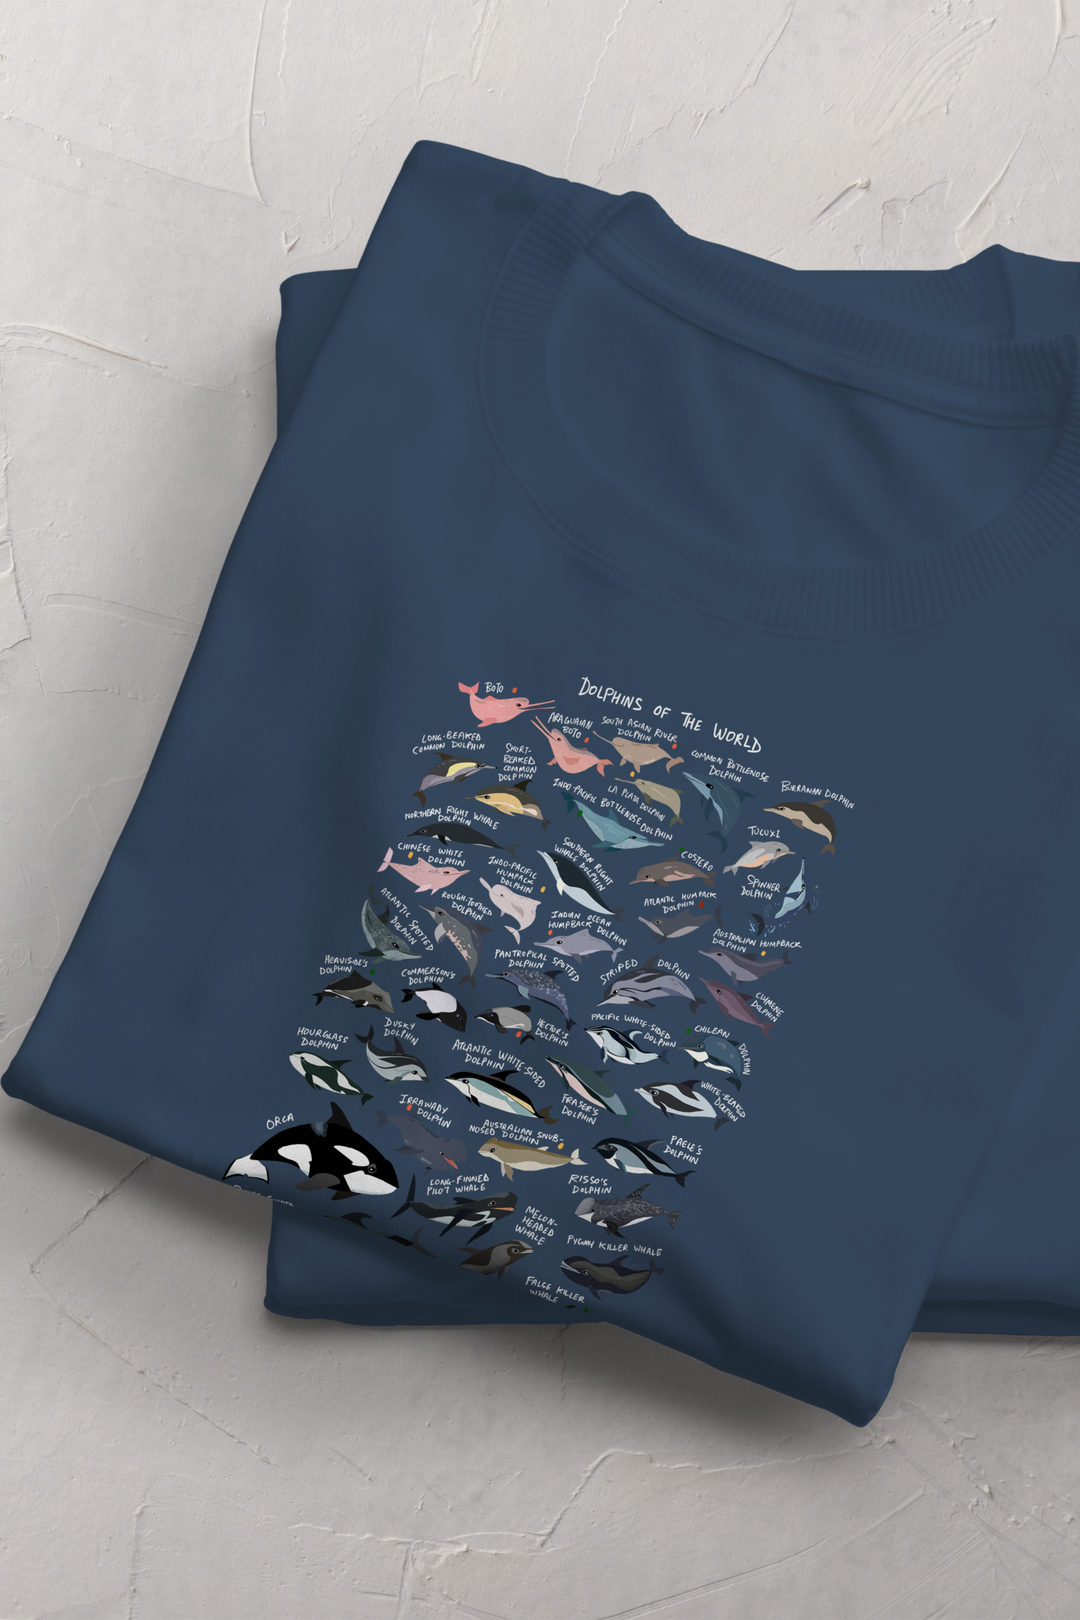 Dolphins of the World T-shirt